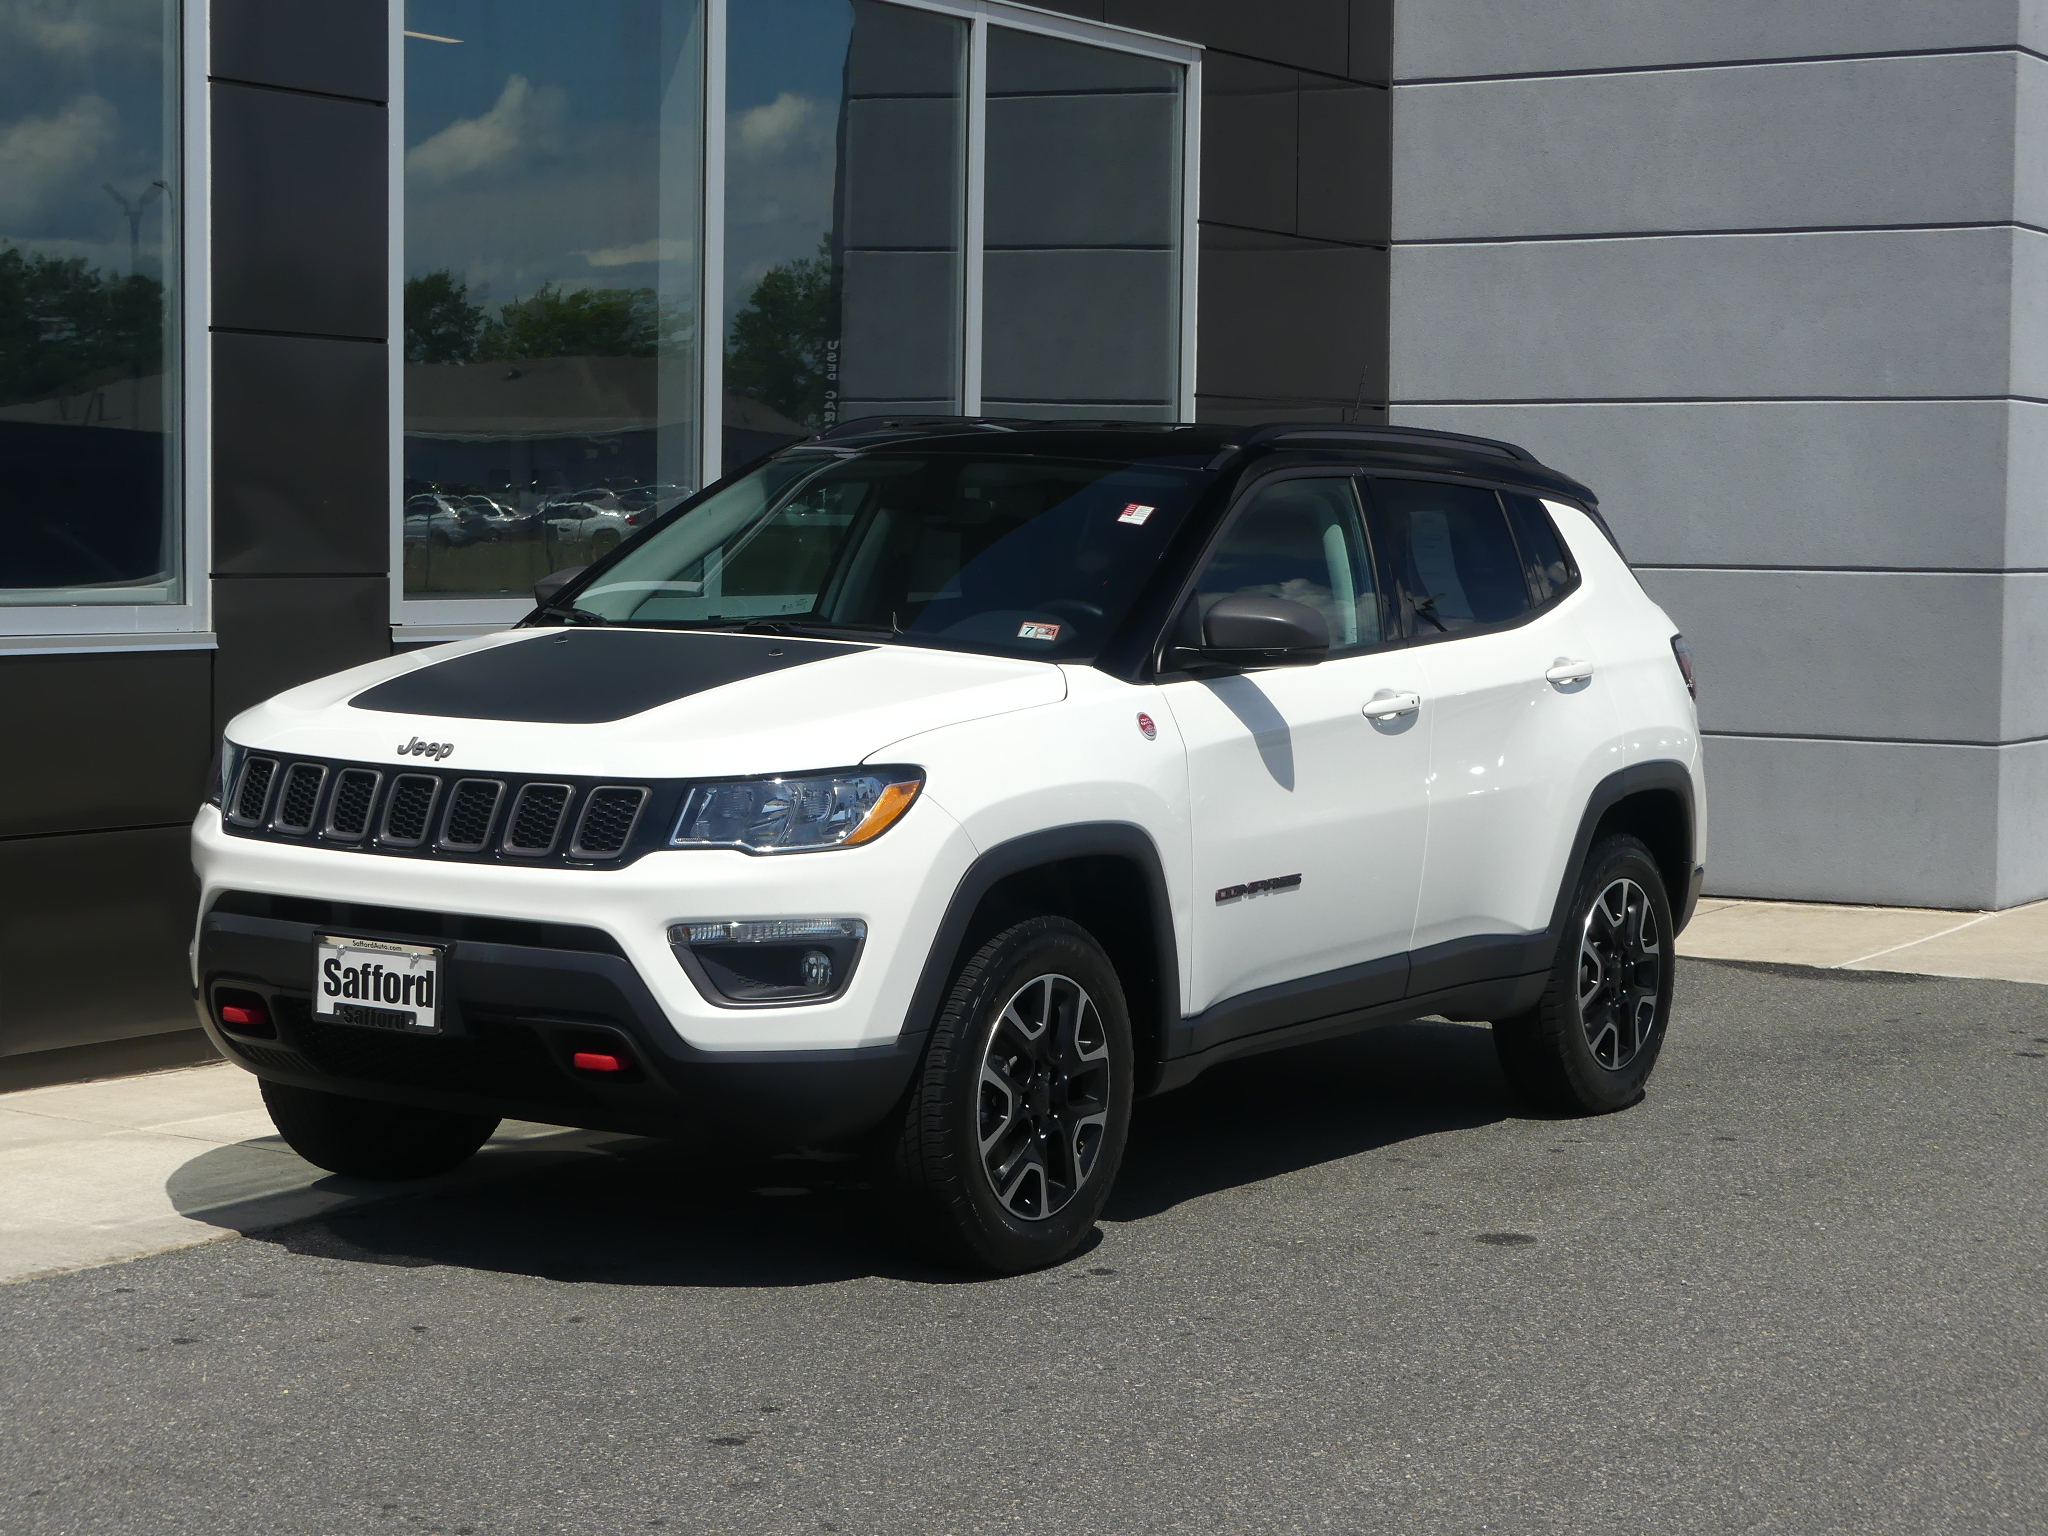 PreOwned 2019 Jeep Compass Trailhawk 4×4